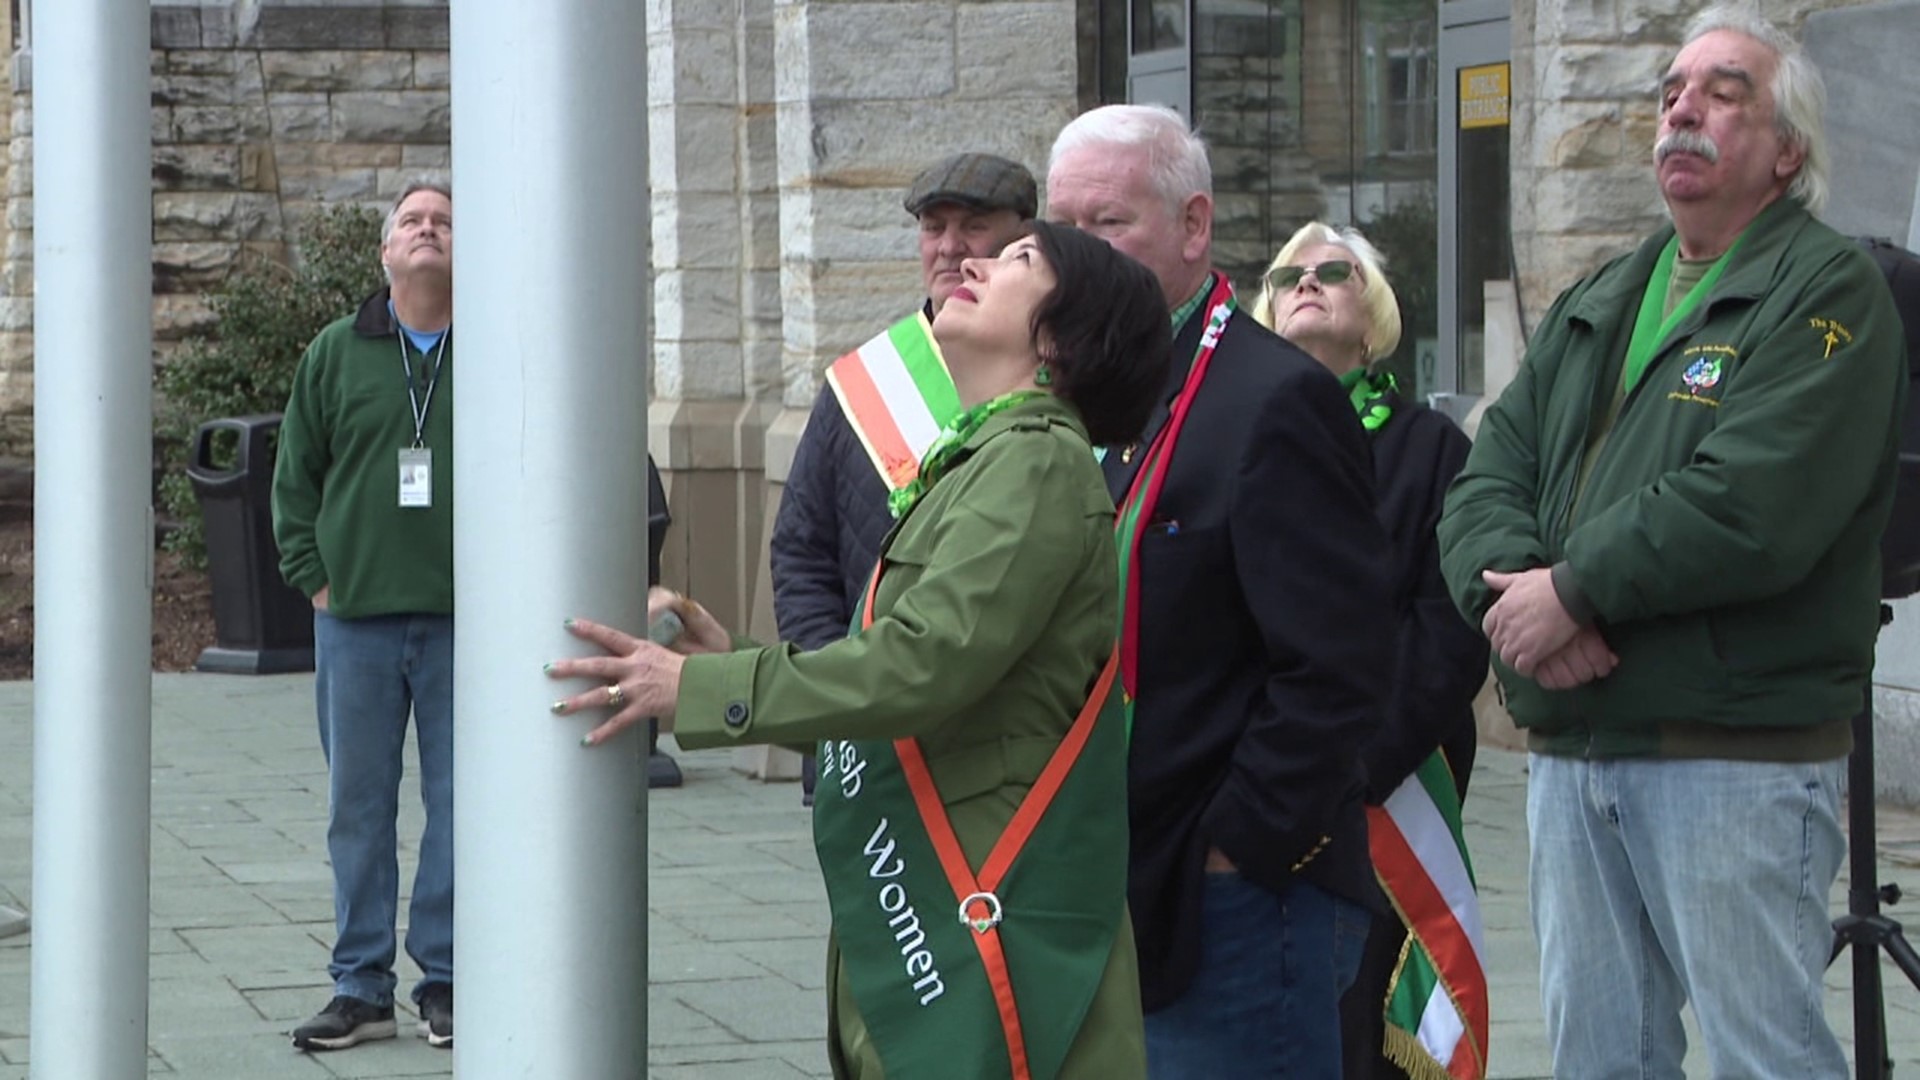 As the city prepares for St. Patrick's Day, groups gathered to raise the Irish flag Sunday.